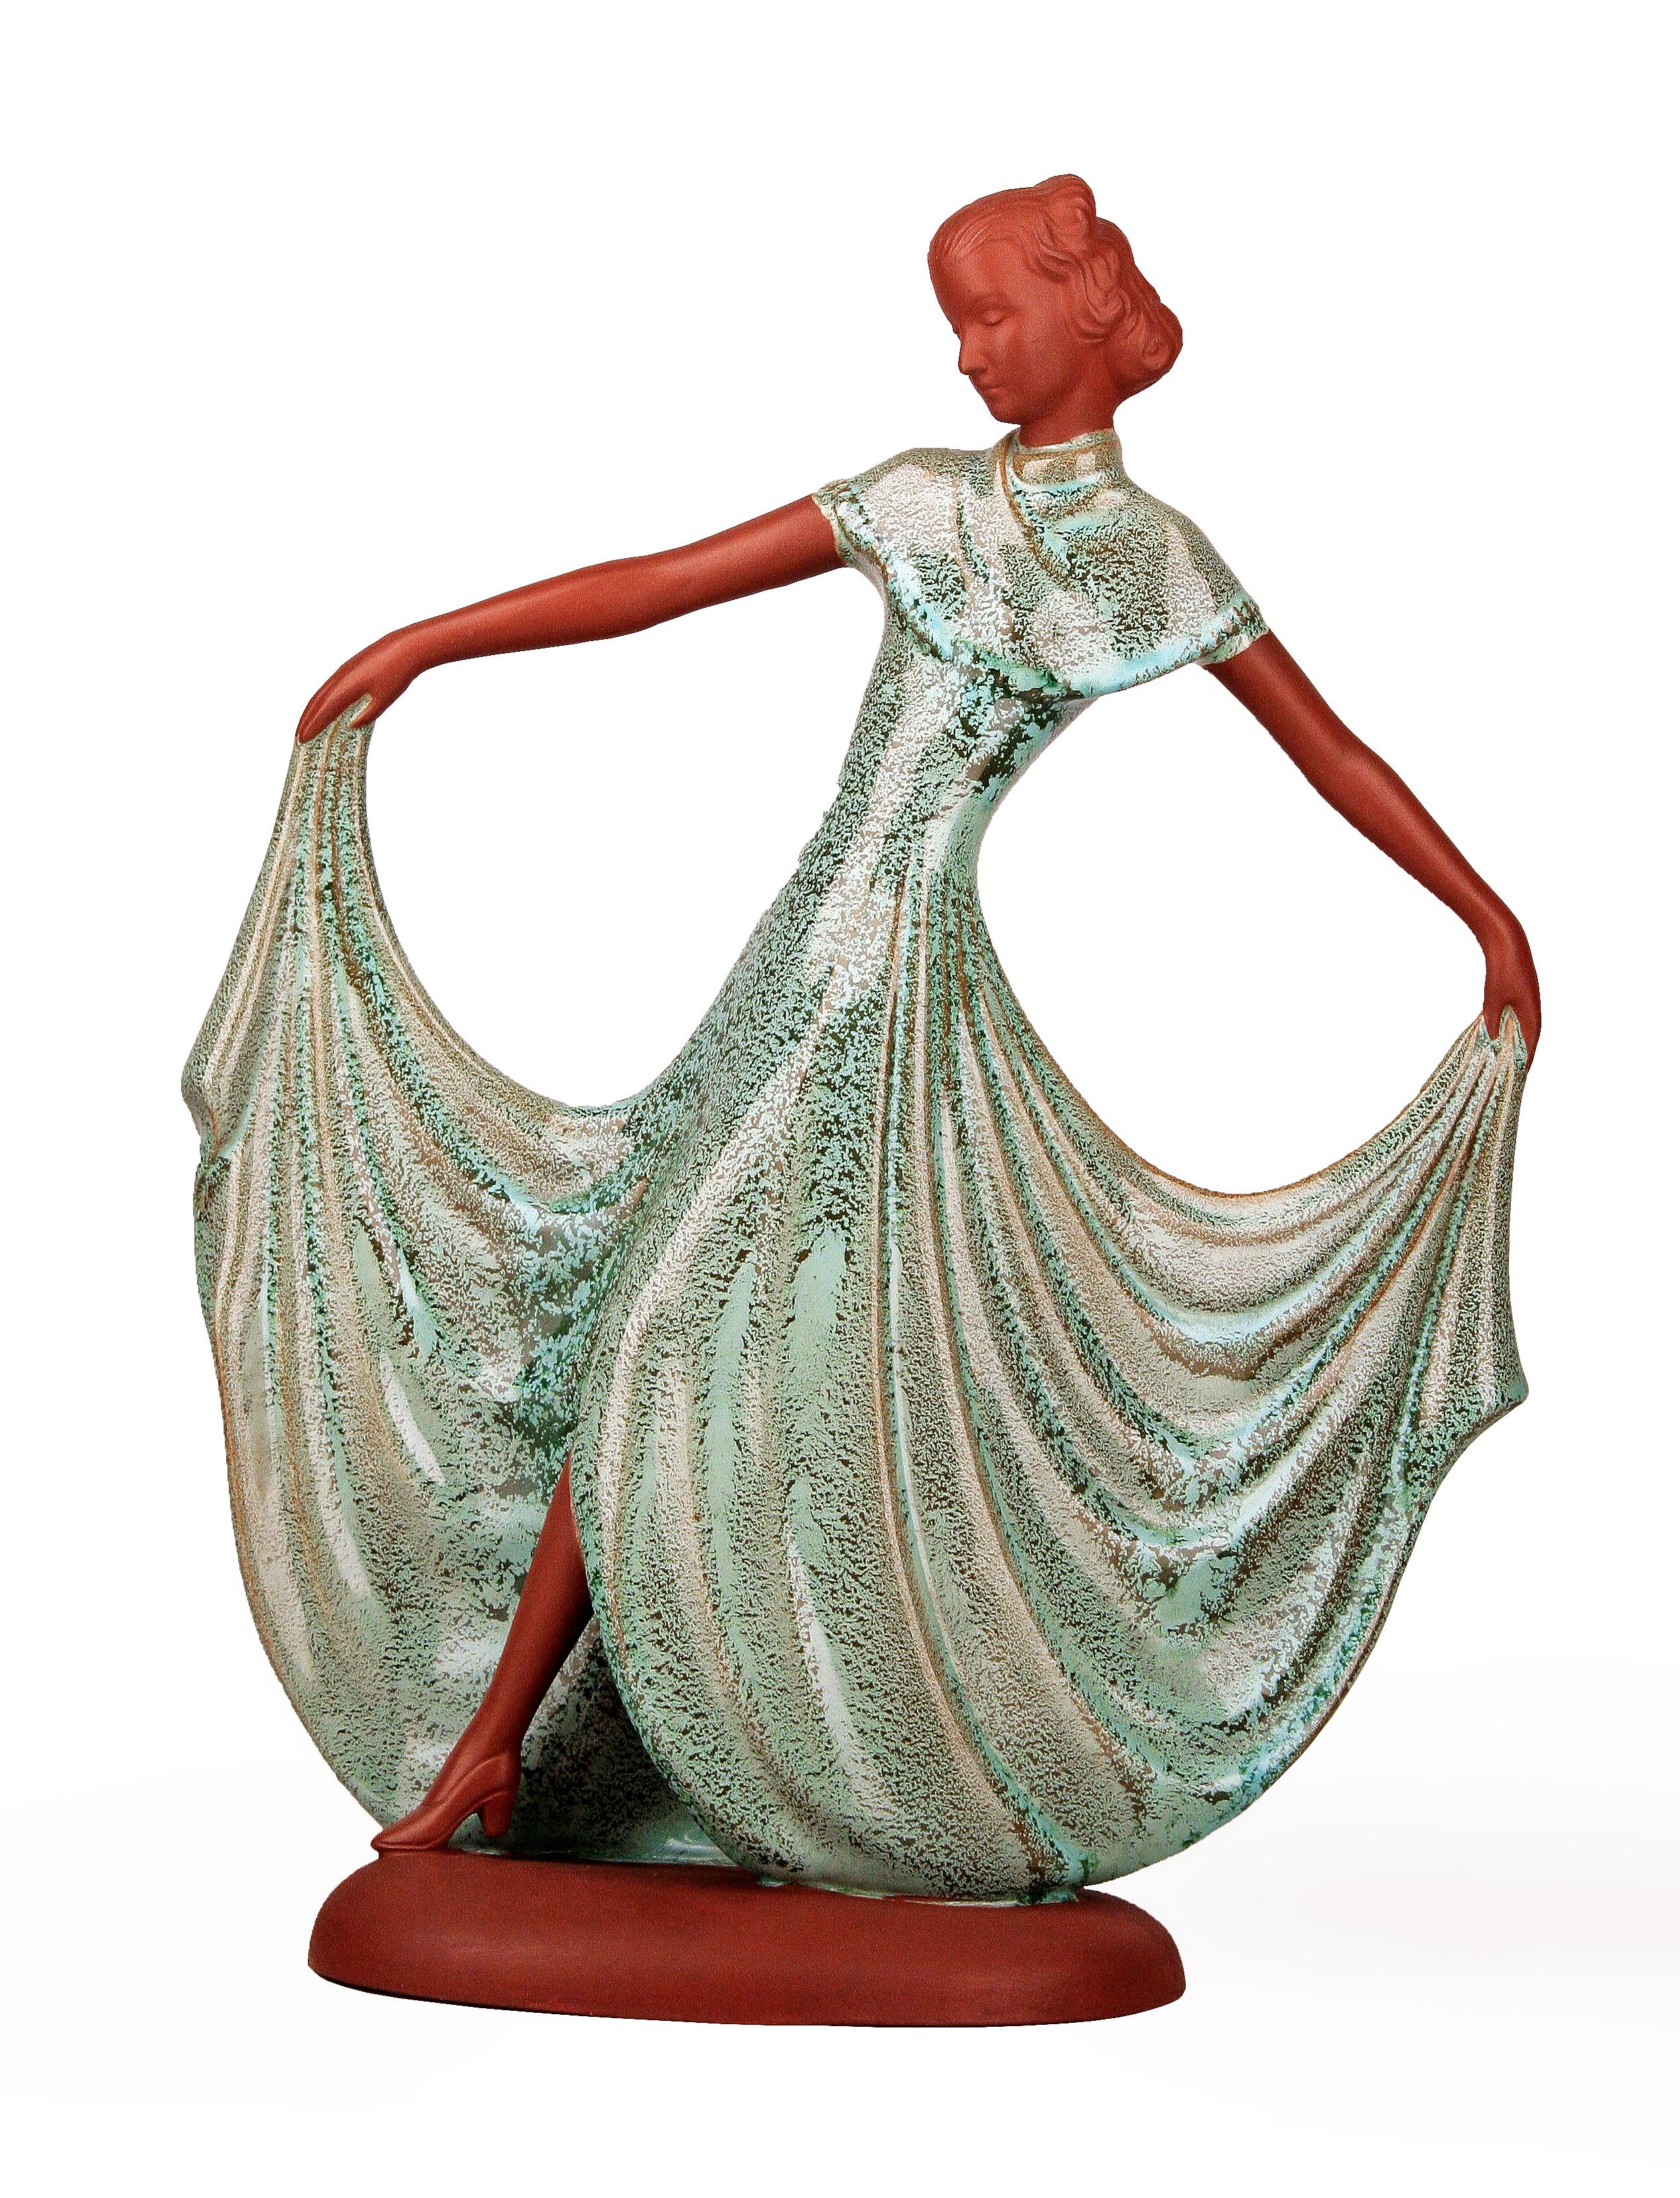 Goldscheider-like Art Déco dancing lady unglazed porcelain figurine from United Kingdom

By: Goldscheider (in the style of)
Material: ceramic, porcelain, paint
Technique: unglazed, molded, pressed, painted, hand-painted, hand-crafted
Dimensions: 4.5